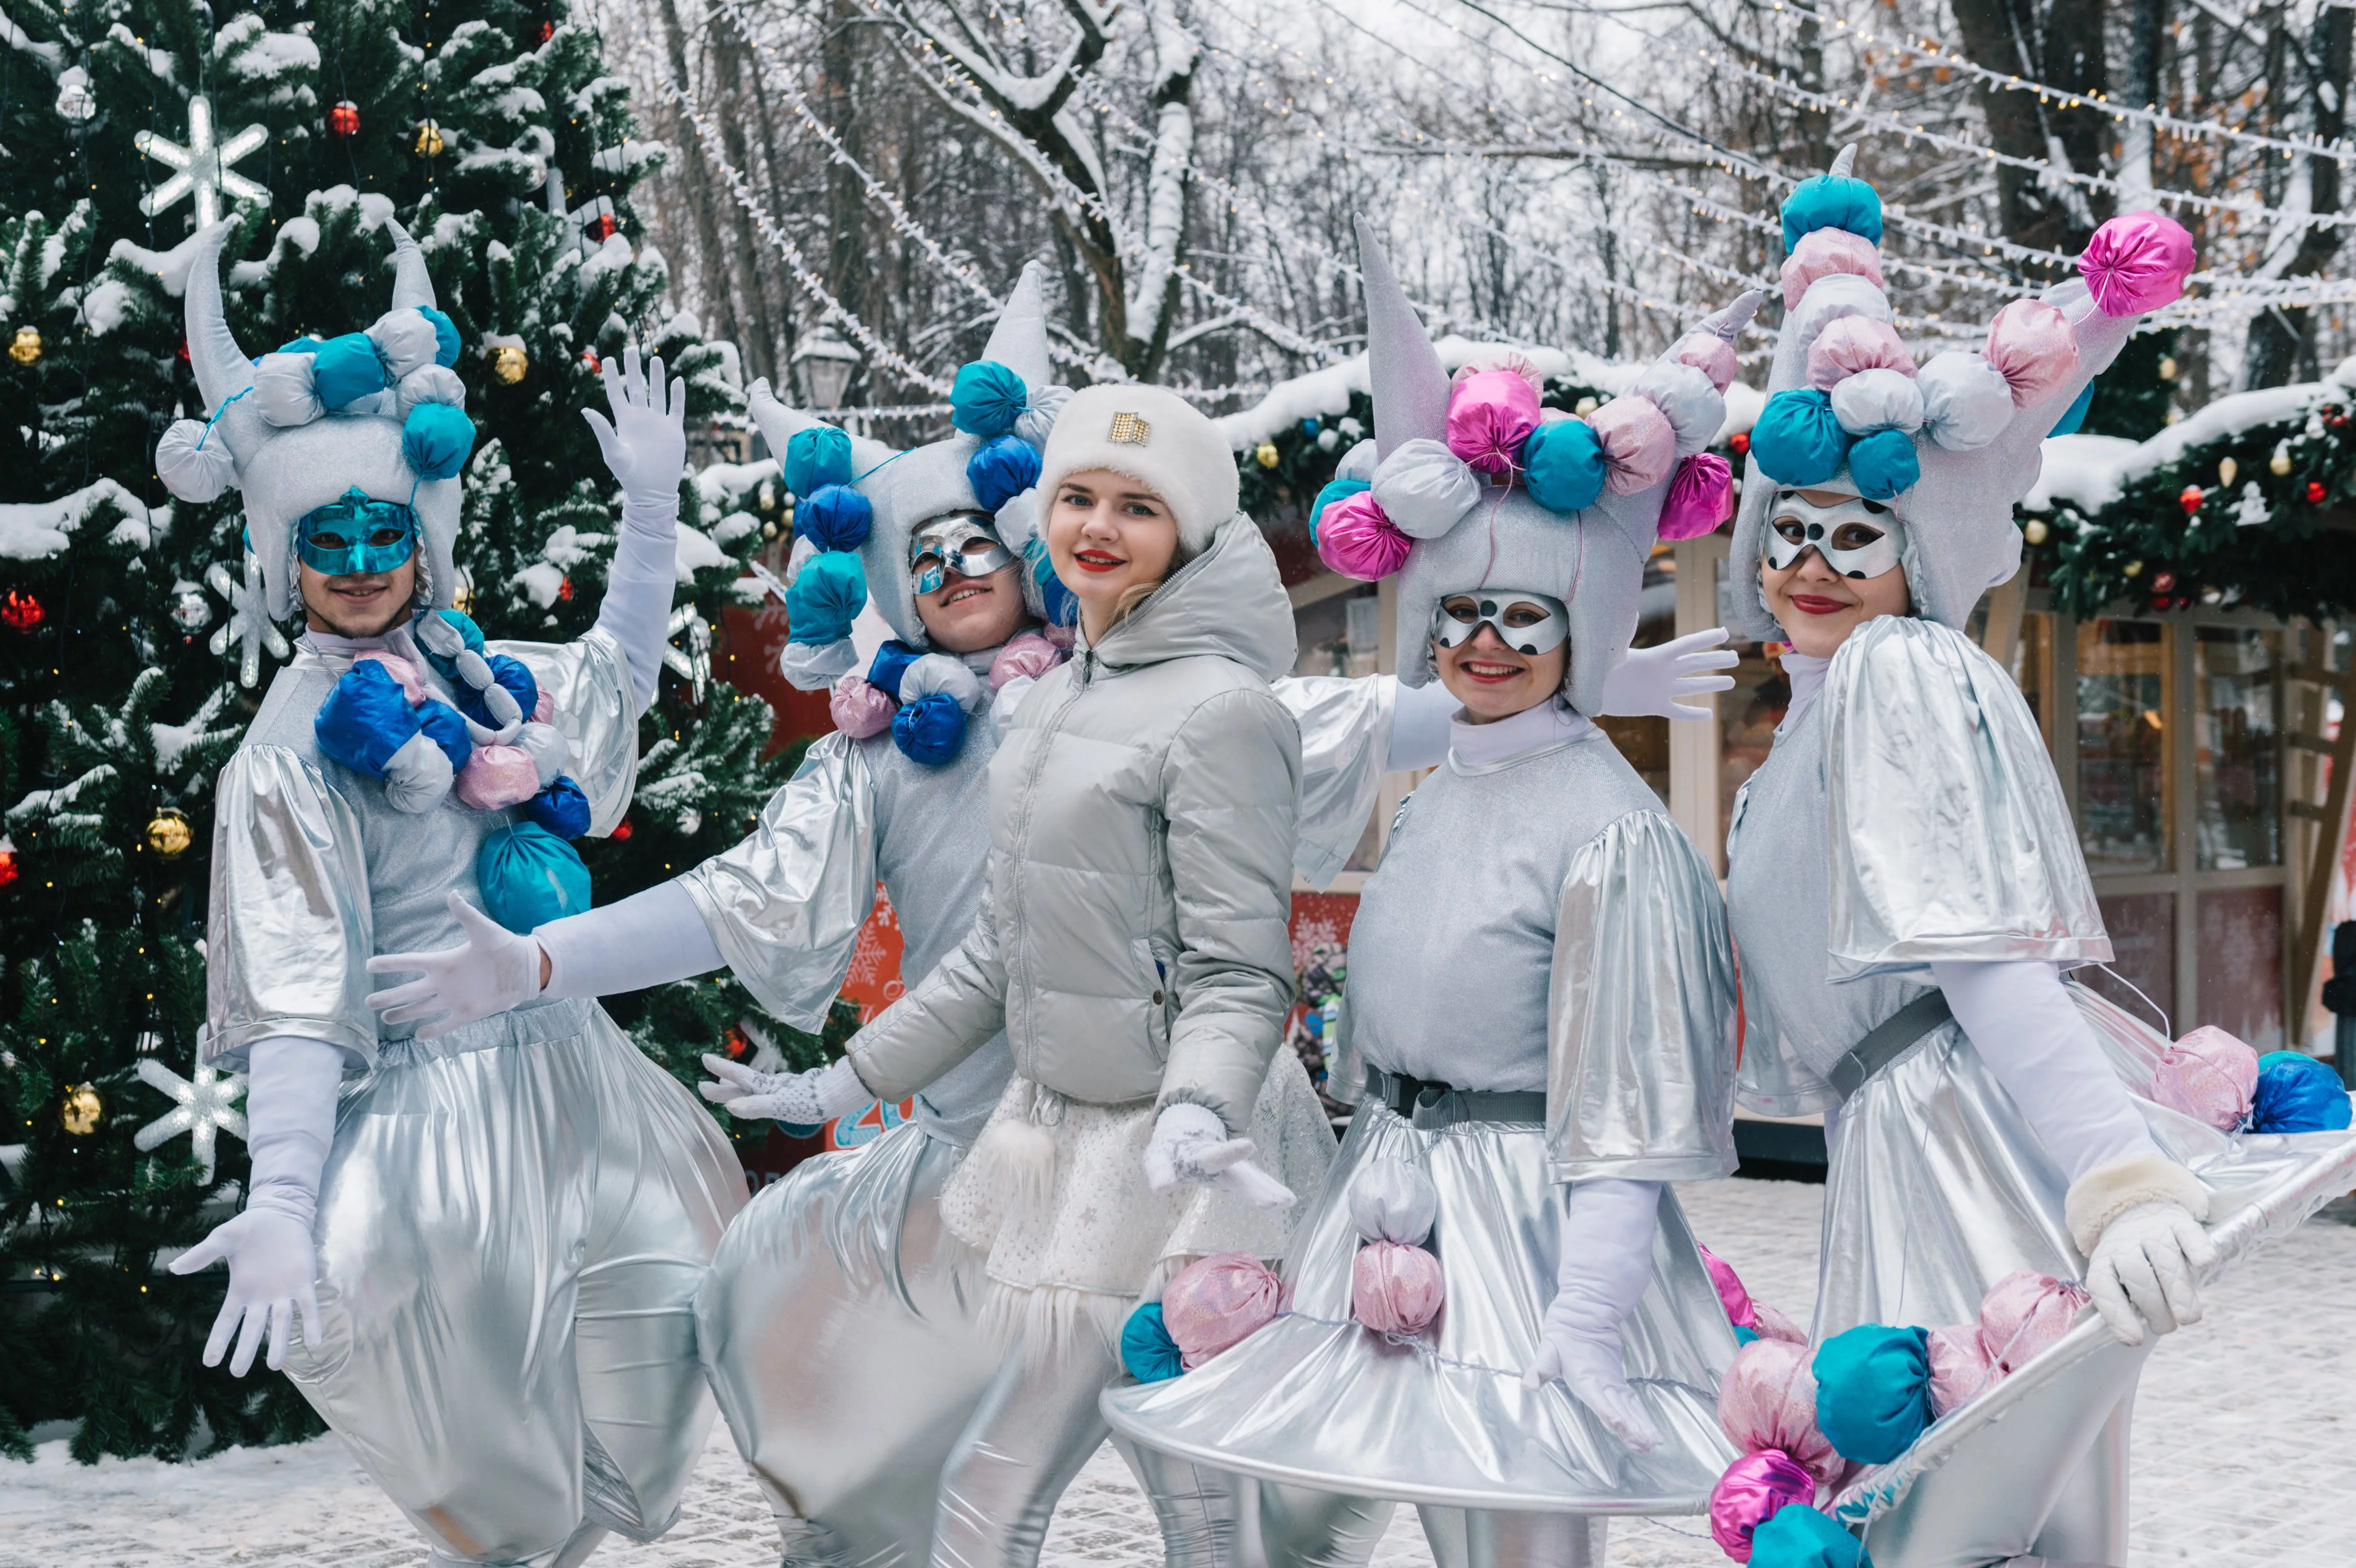 Girls in holiday costumes standing in snow